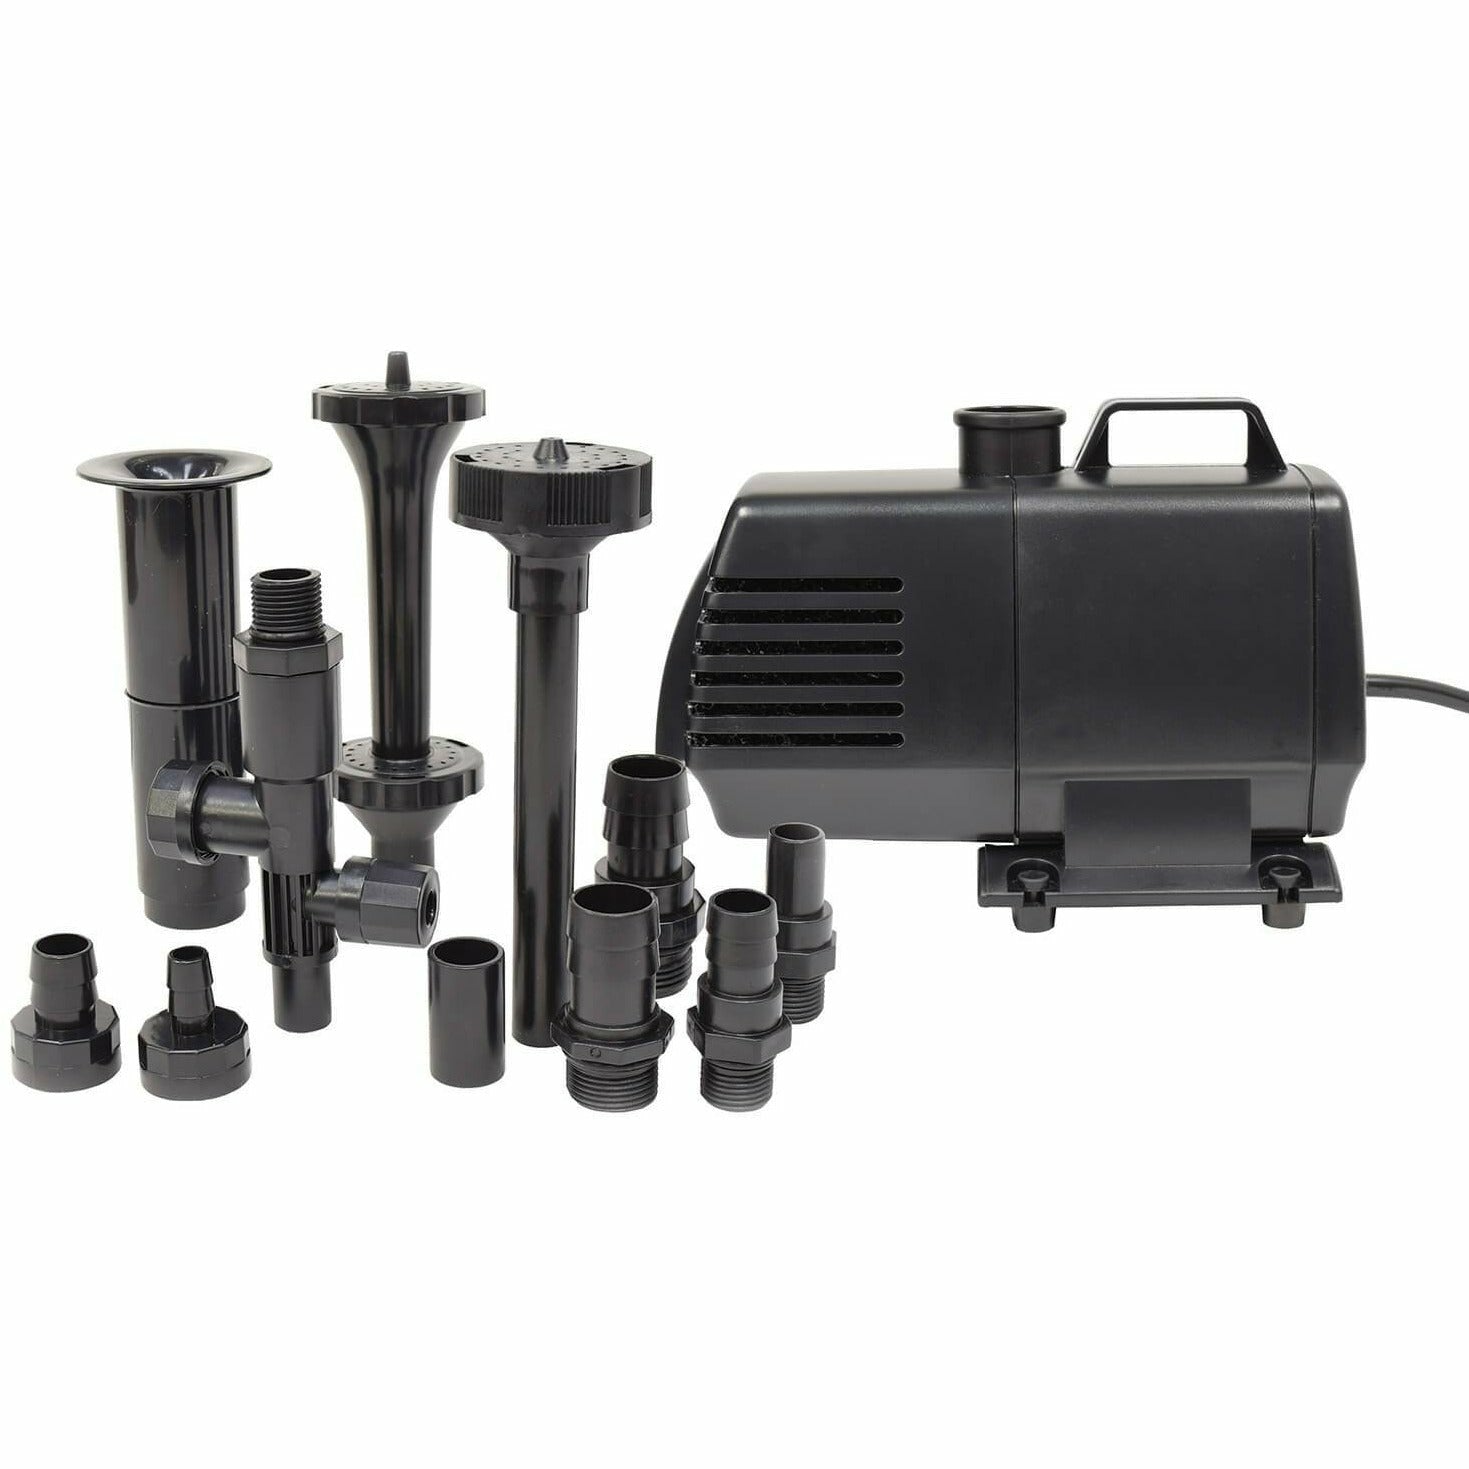 Submersible Mag Drive Pump 1050 GPH | Reliable | Quiet & Energy Efficient - American Pond Supplies Easy Pro Mag Drive Pumps Mag Drive Pumps